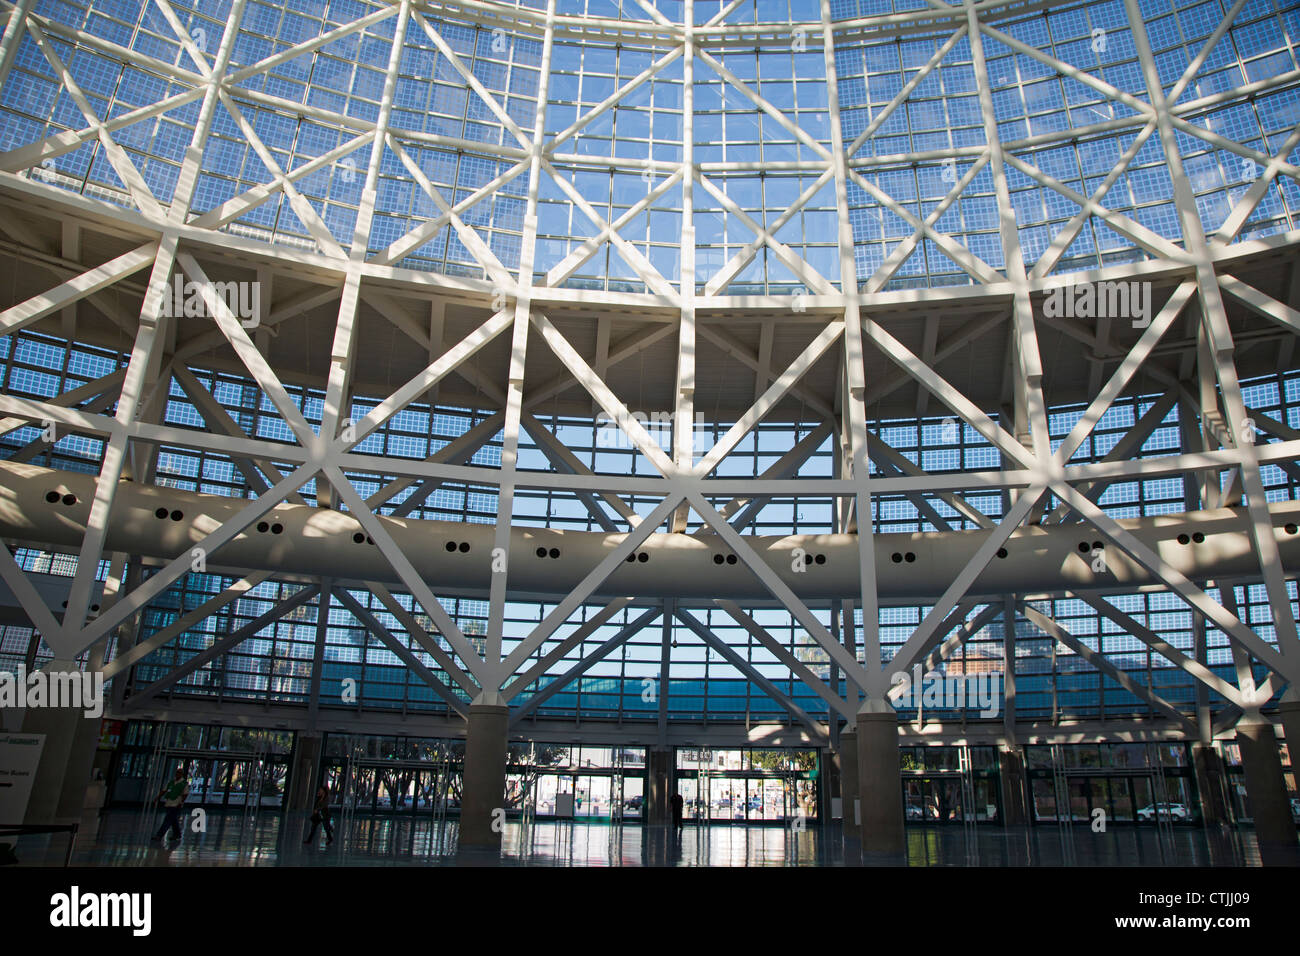 Los Angeles, California - The lobby of the Los Angeles Convention Center. Stock Photo